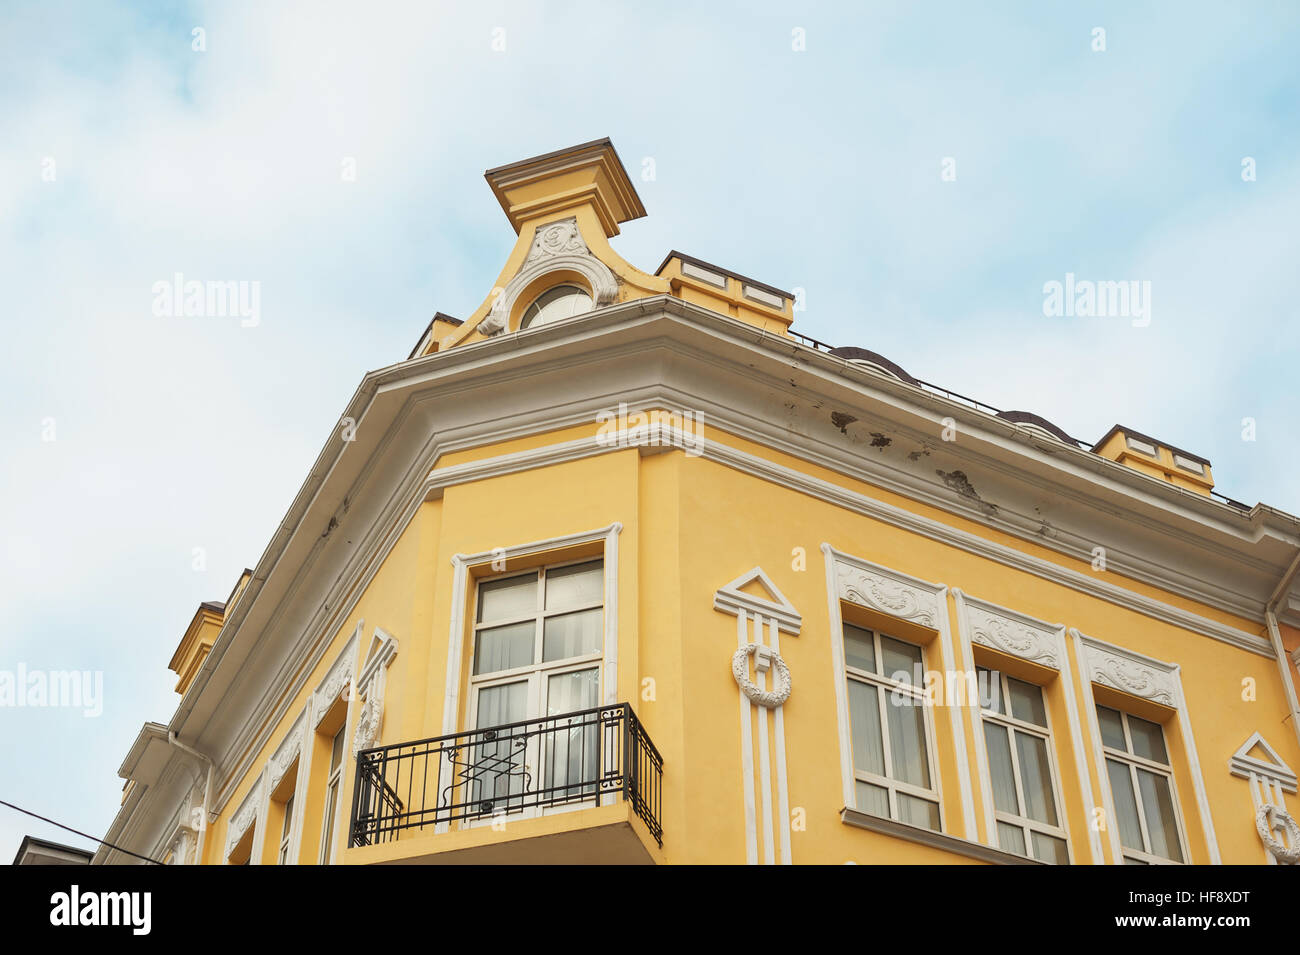 architectural historic building with window and balcony Stock Photo